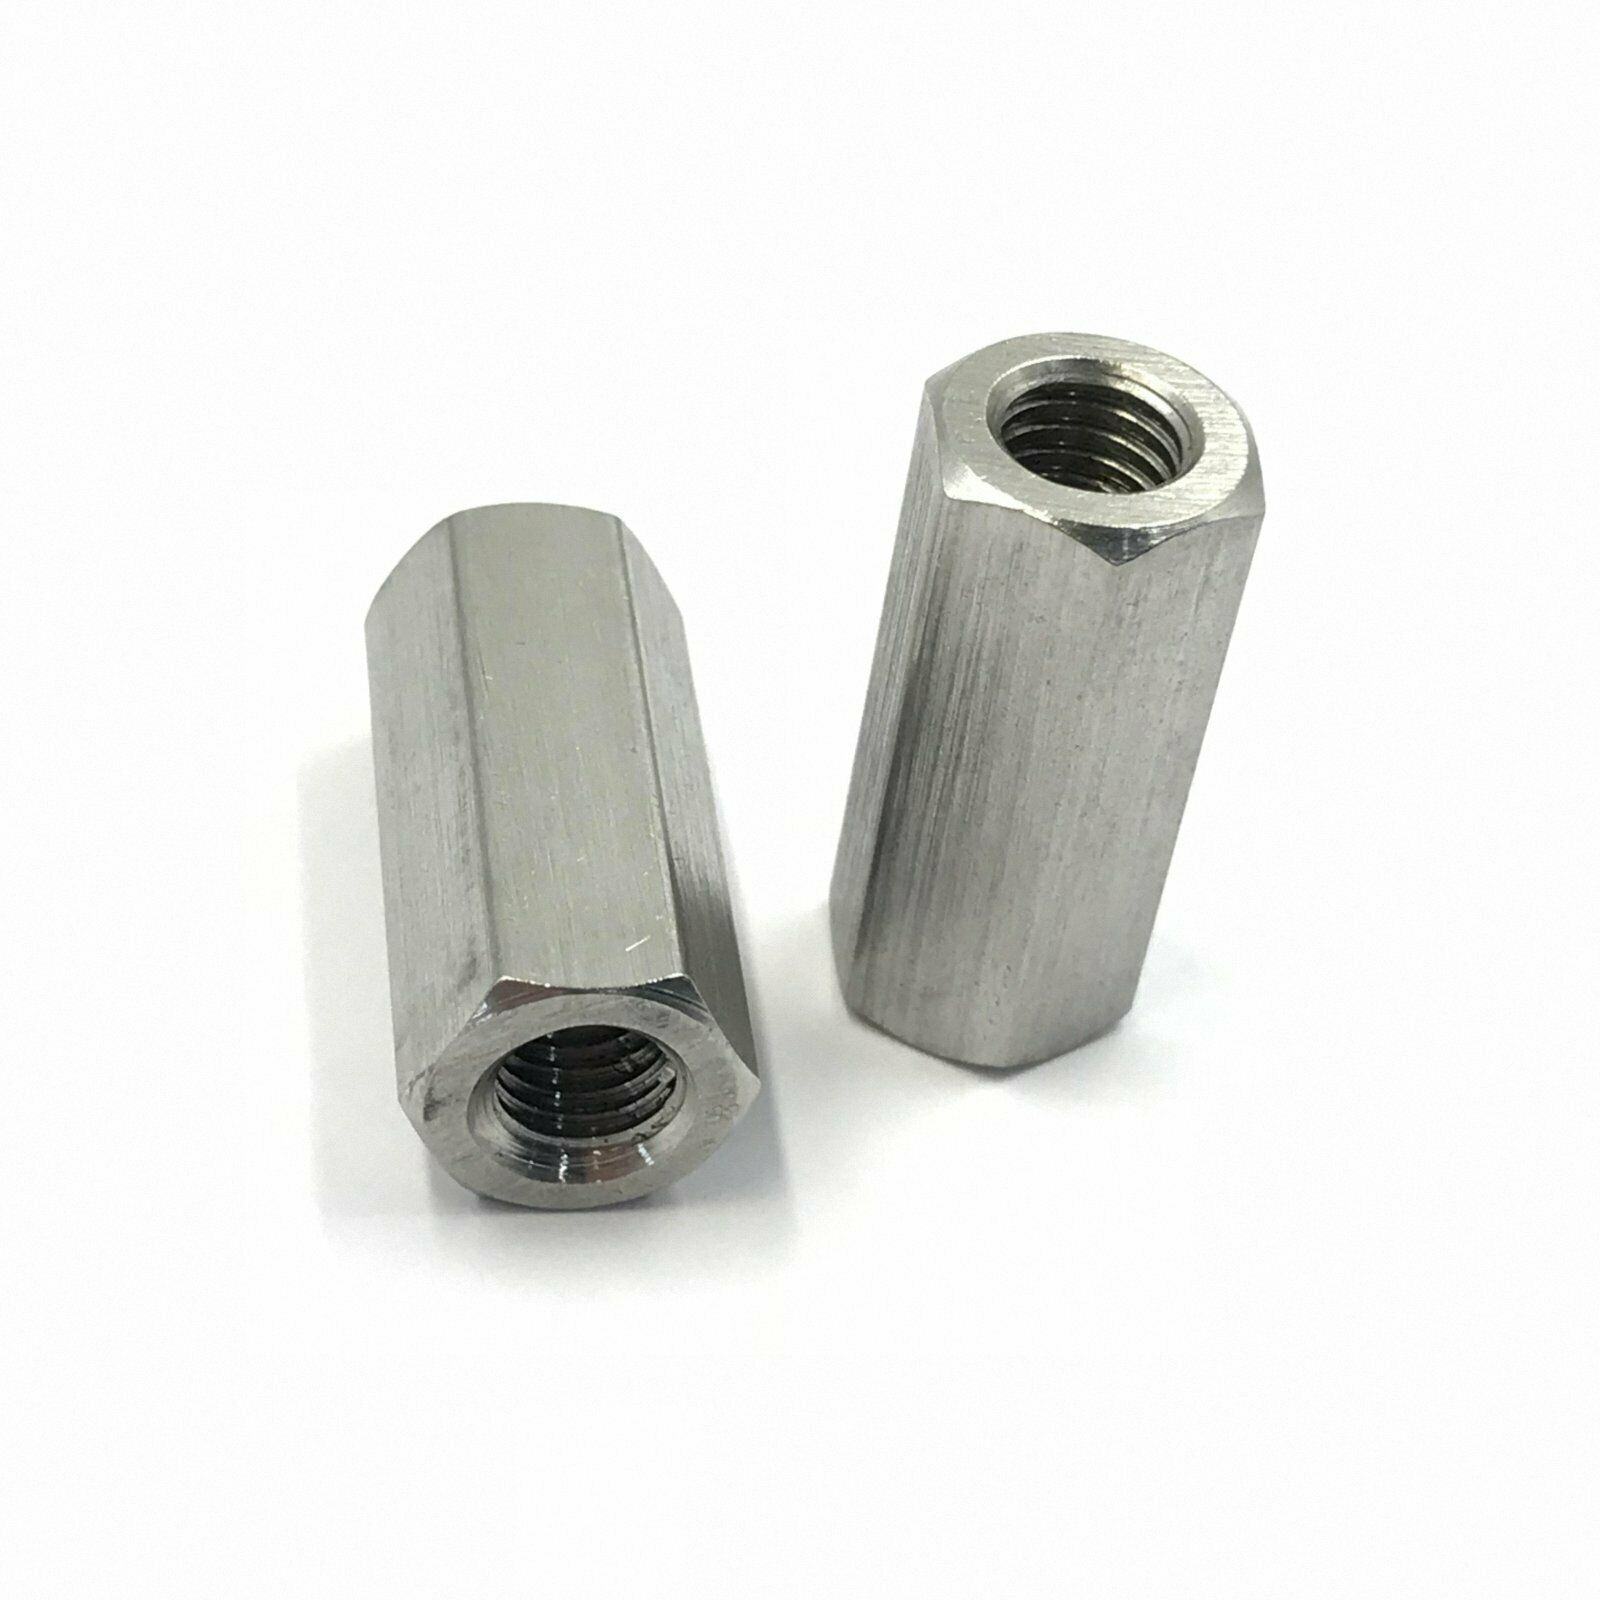 2 Pcs M8 x 1.25 304 Stainless Steel Long Rod Coupling Hex Nut [M_M_S]